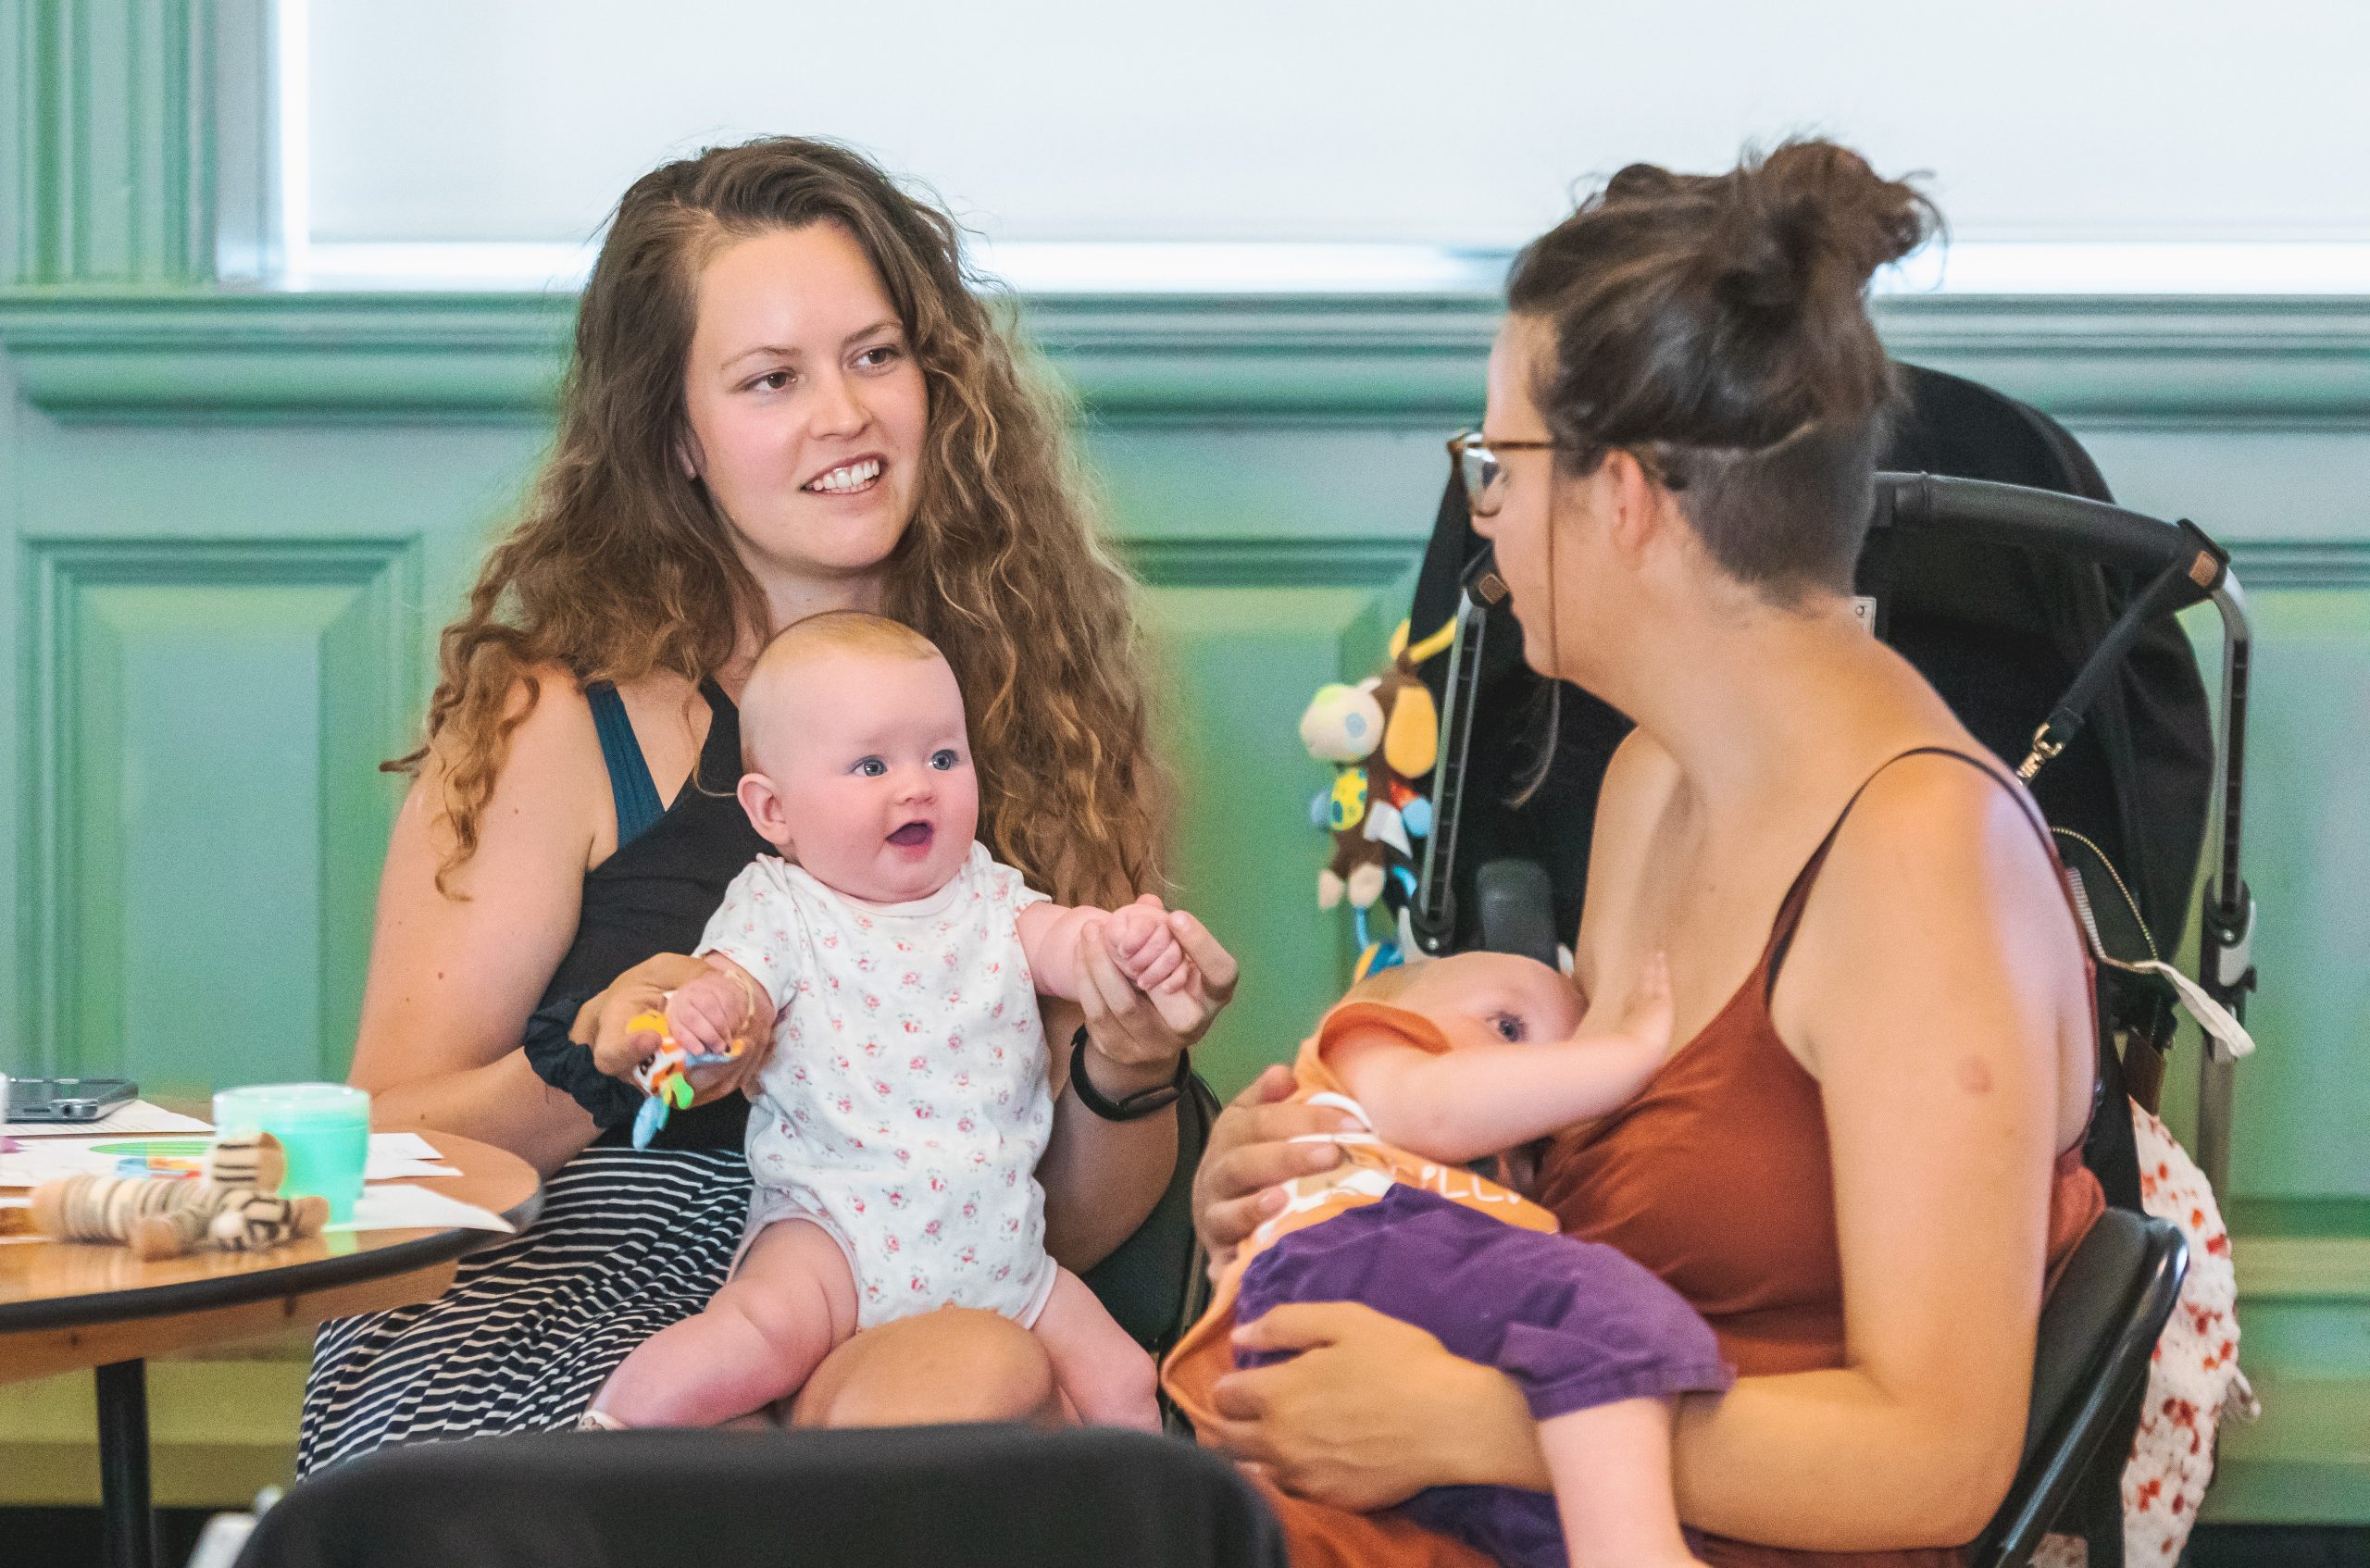 Photograph of two seated women. One has a baby on her lap and another is breastfeeding a baby.